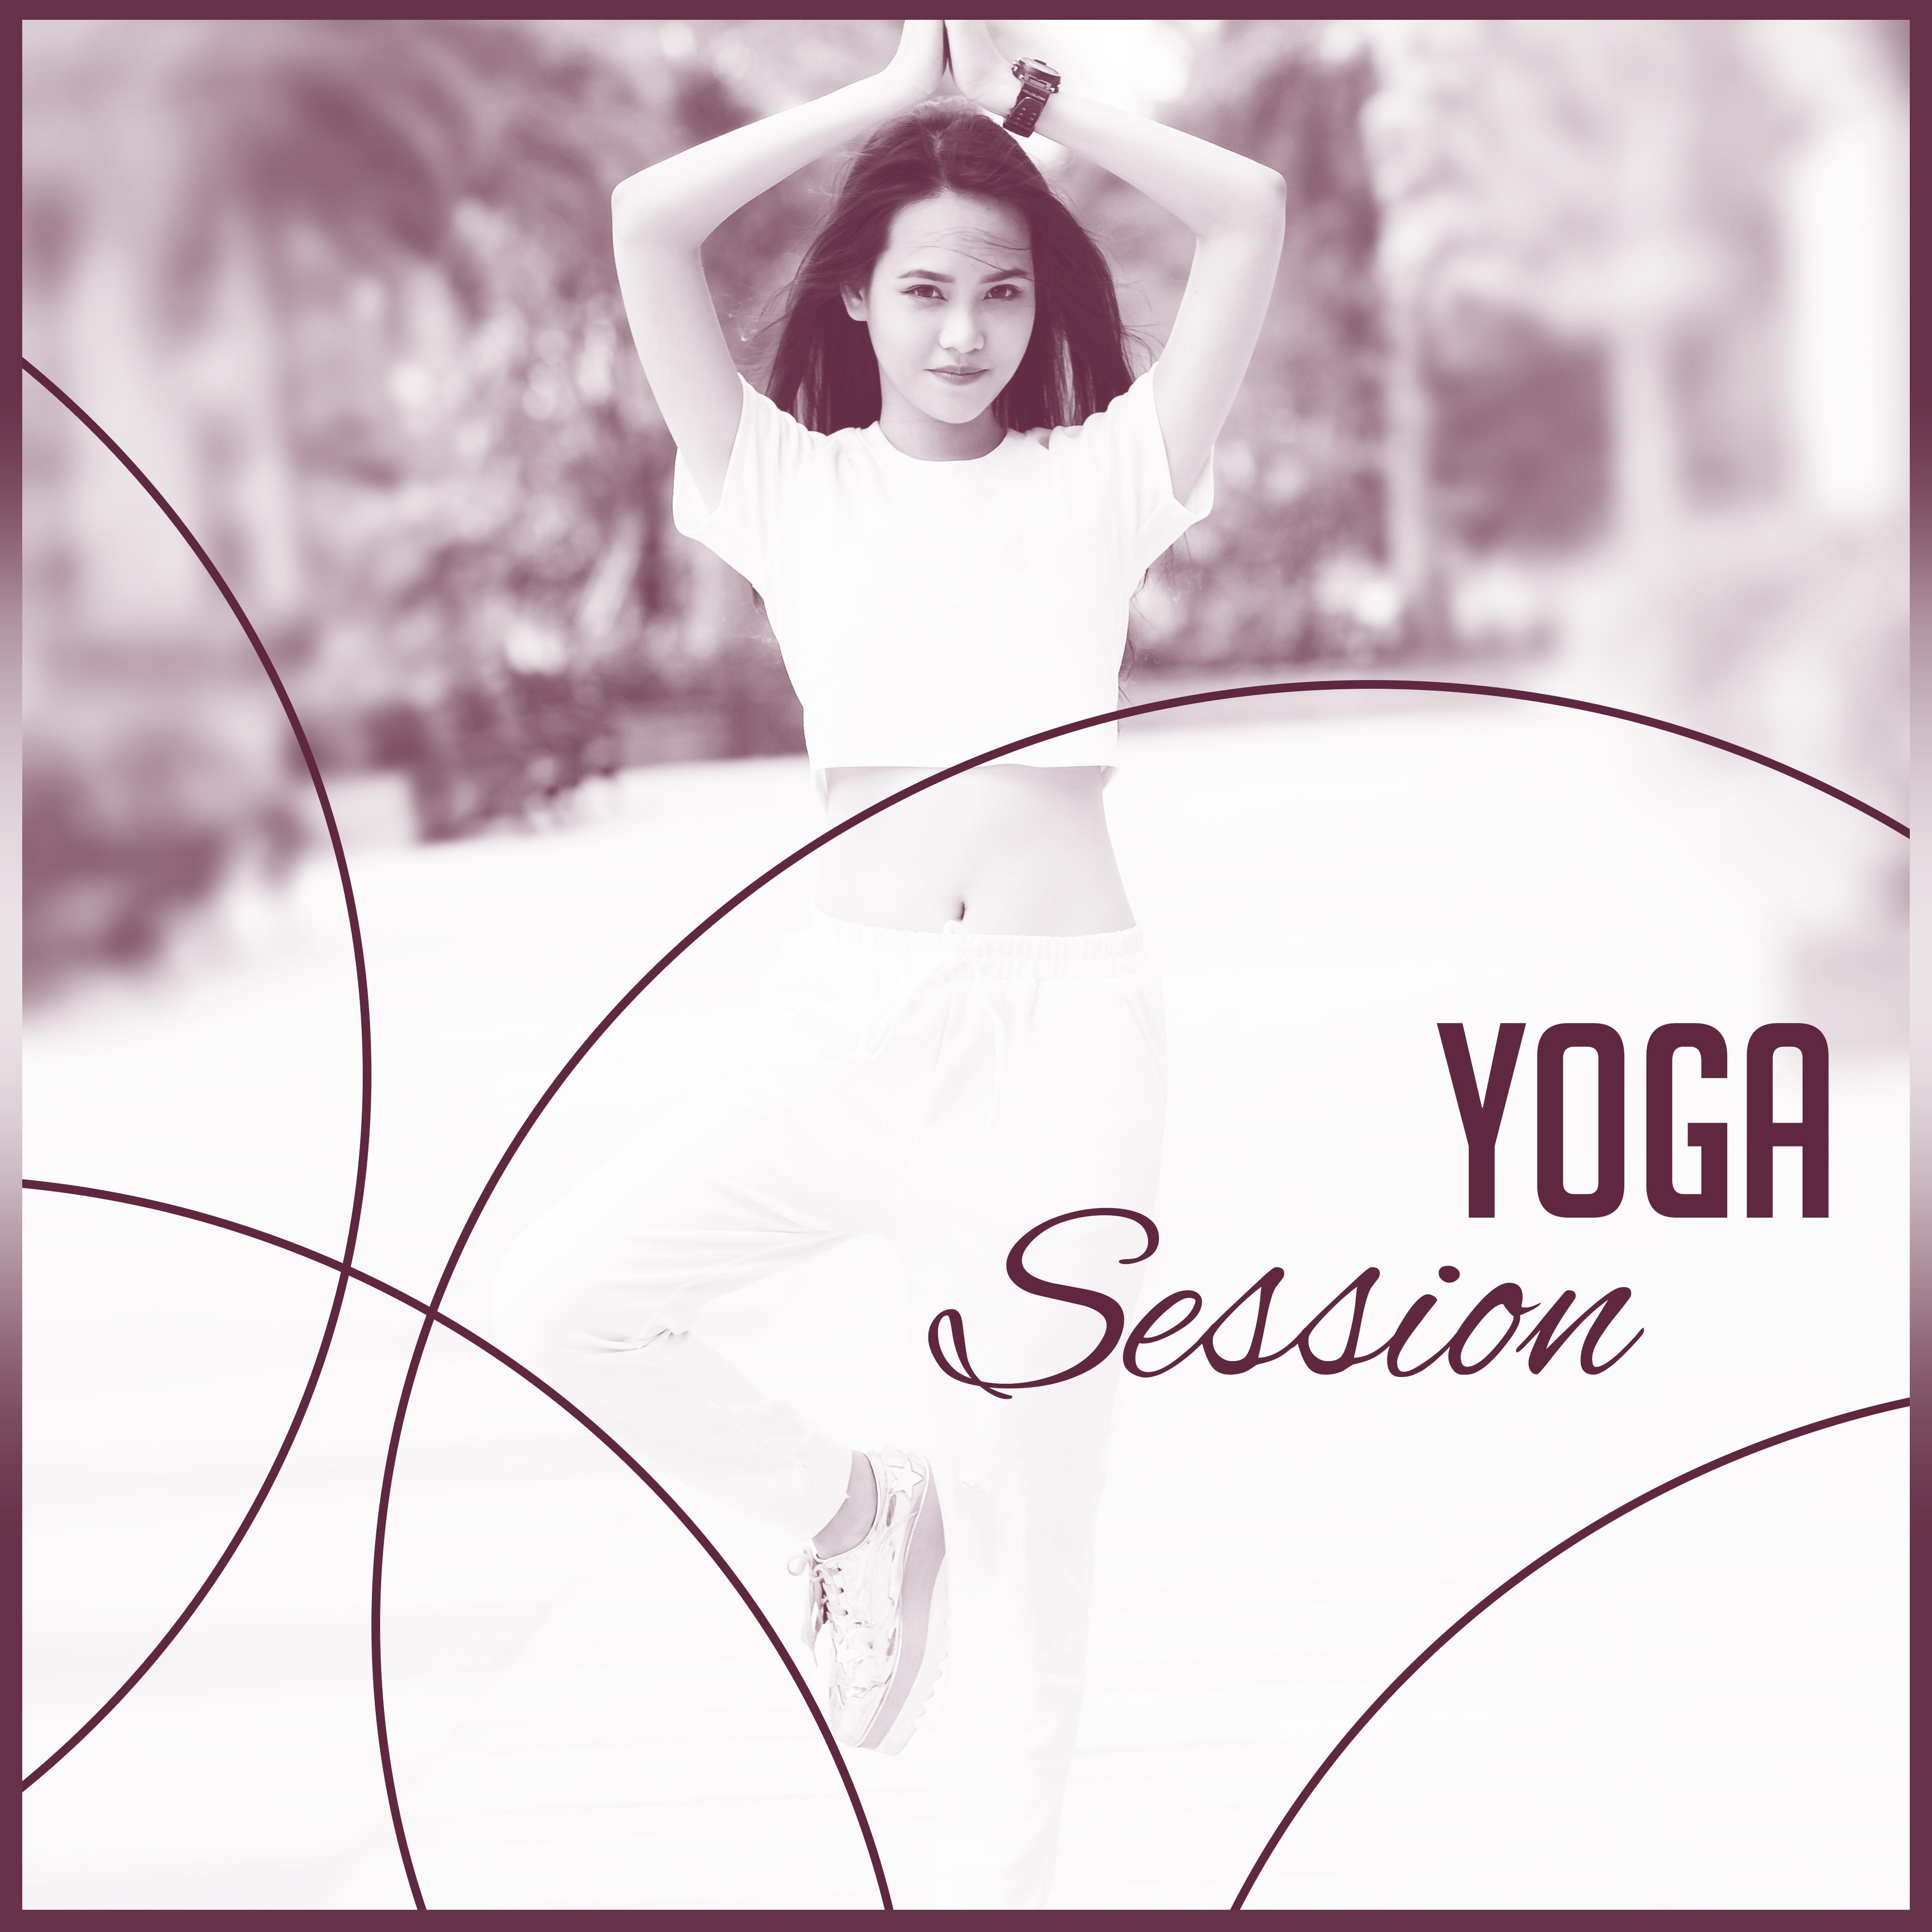 Yoga Session – New Age Music for Yoga, Deep Meditation, Relaxation, Rest, Stress Relief, Zen, Chakra